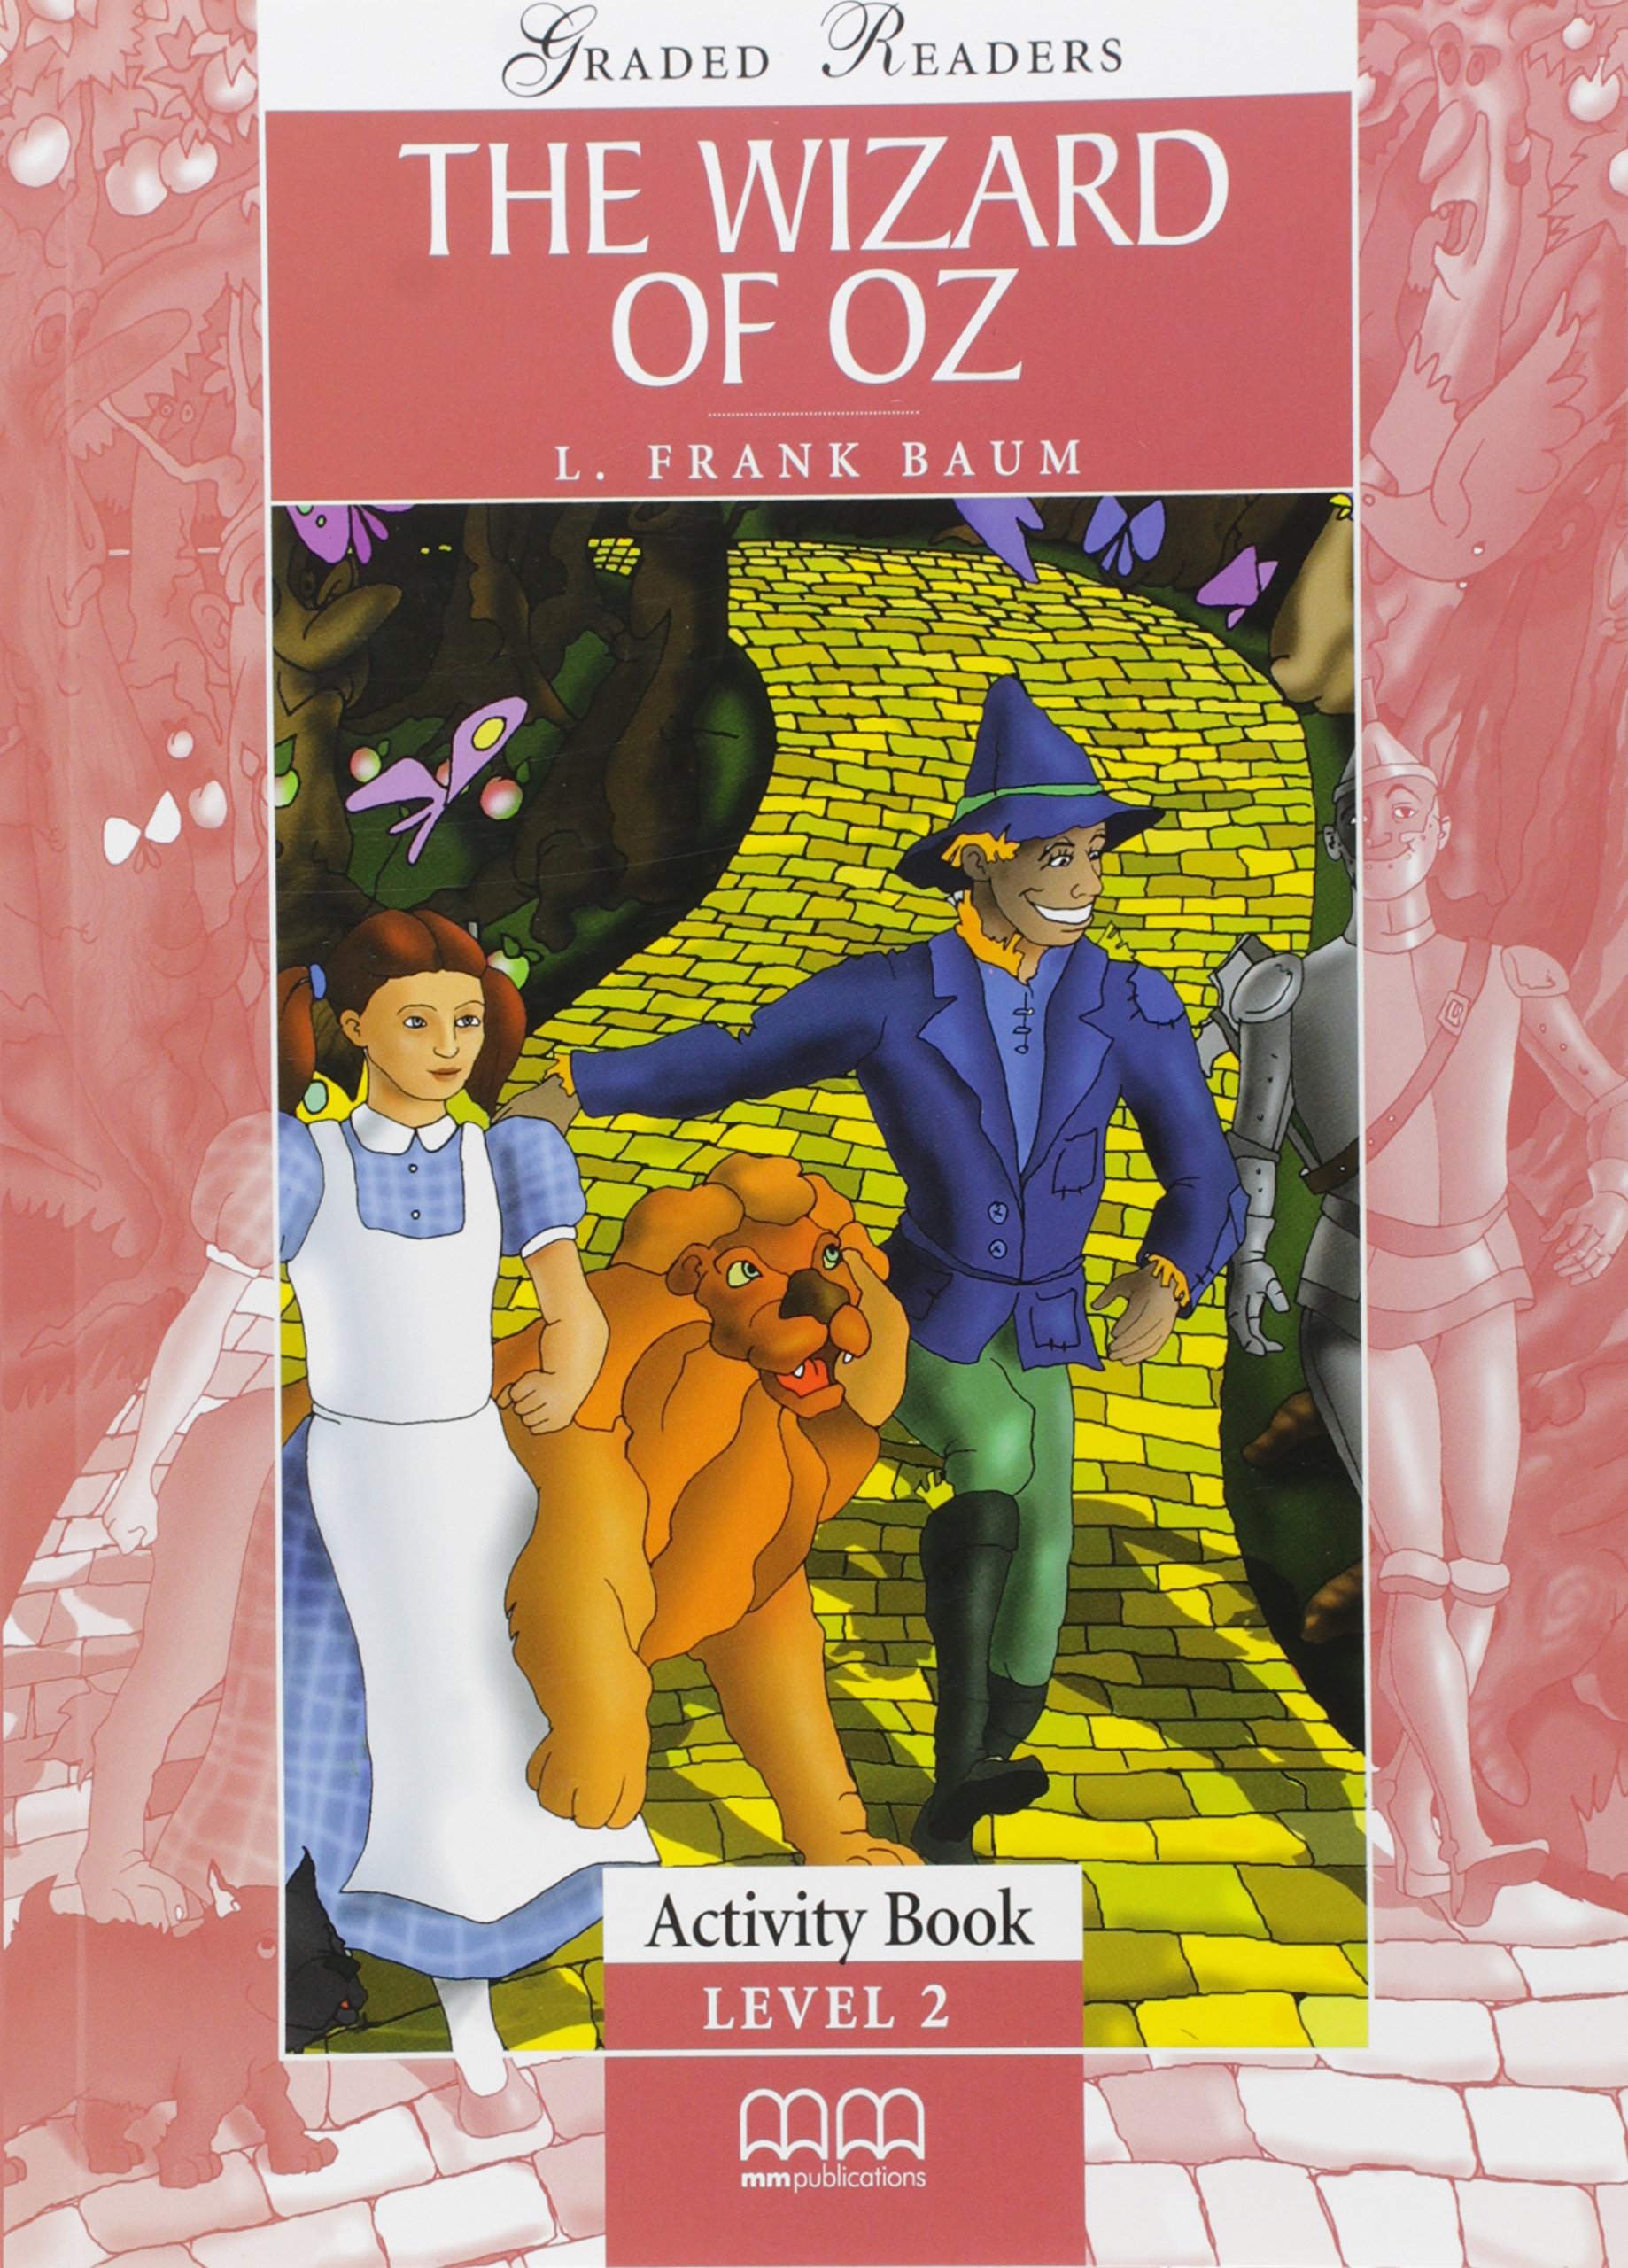 The Wizzard of Oz